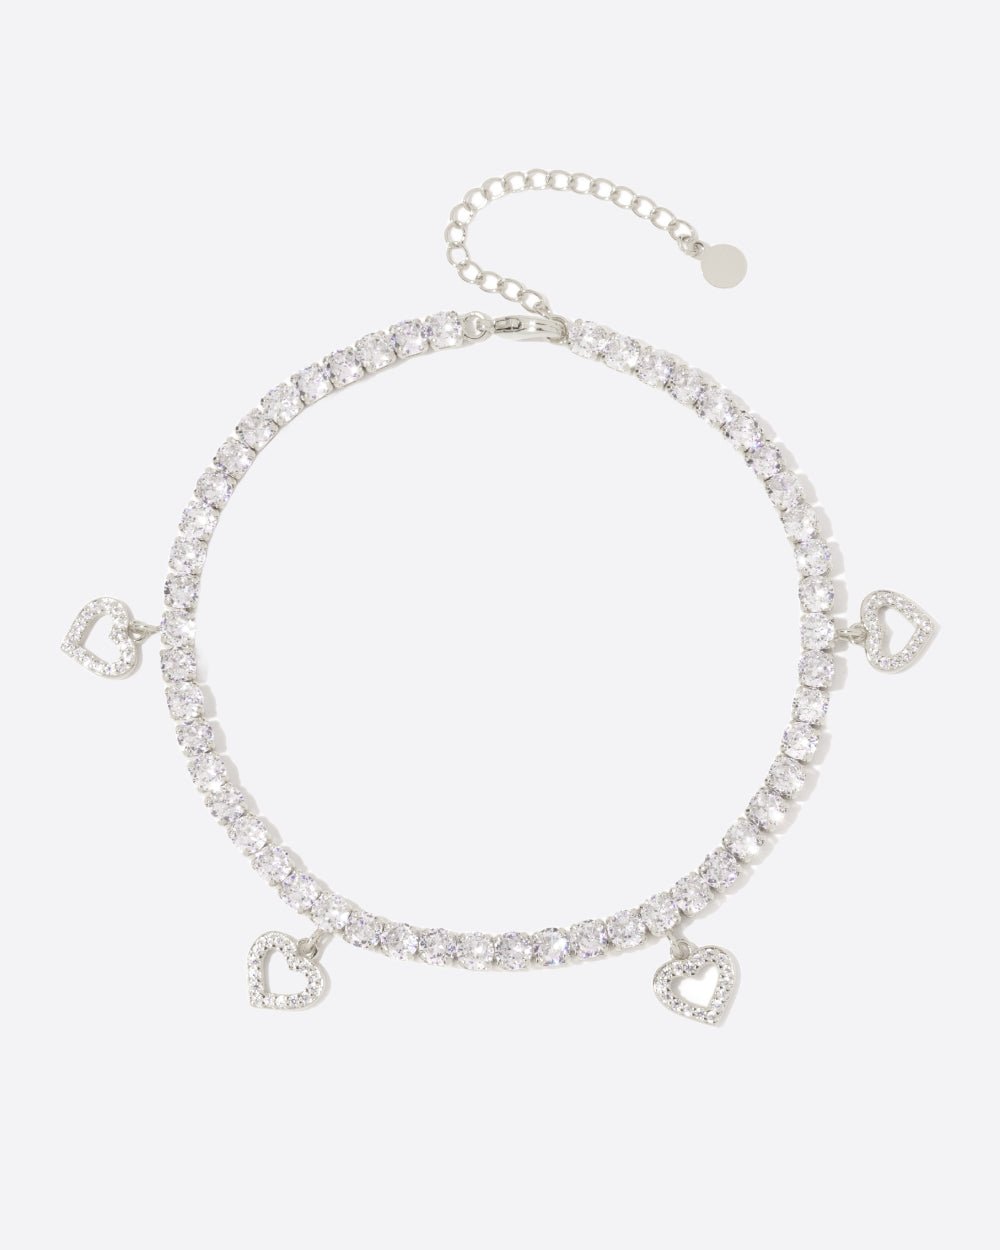 ICED HEARTS TENNIS ANKLET. - 4MM WHITE GOLD - Drippy Amsterdam